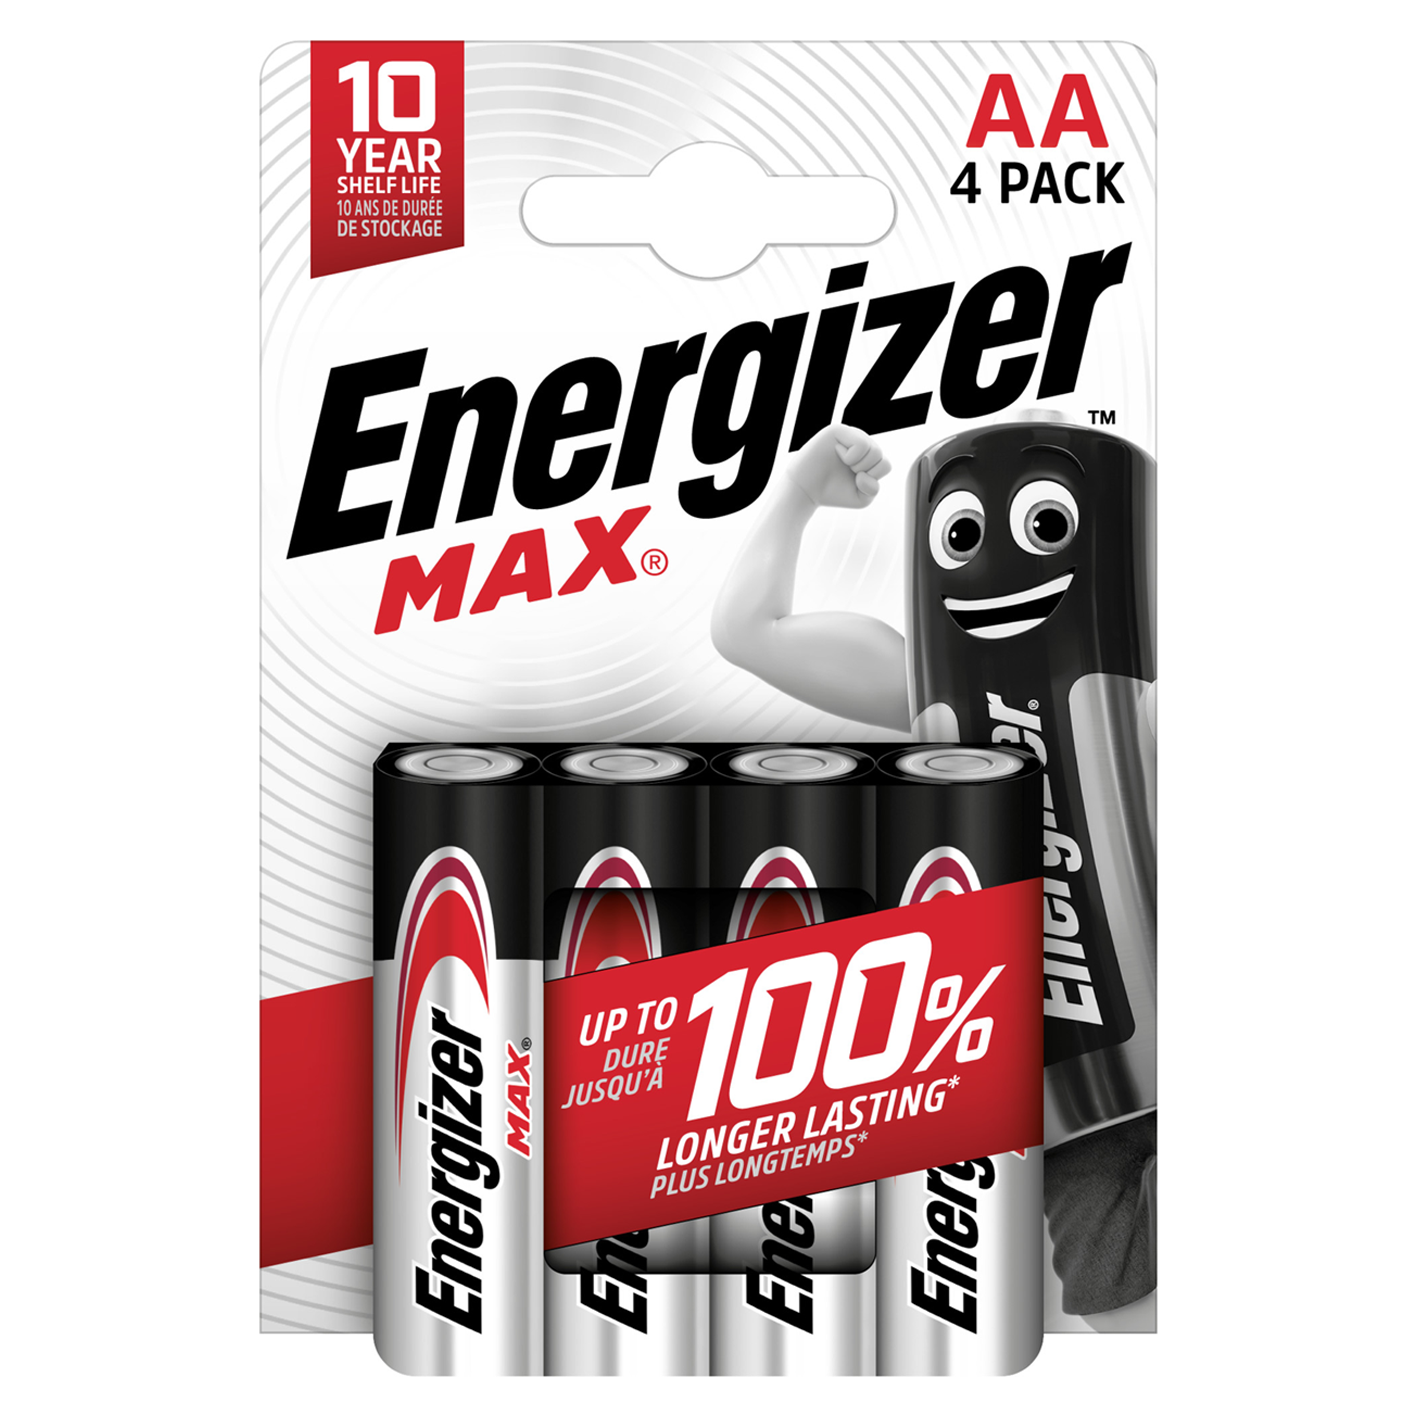 Energizer AA Max Alkaline, Pack of 4